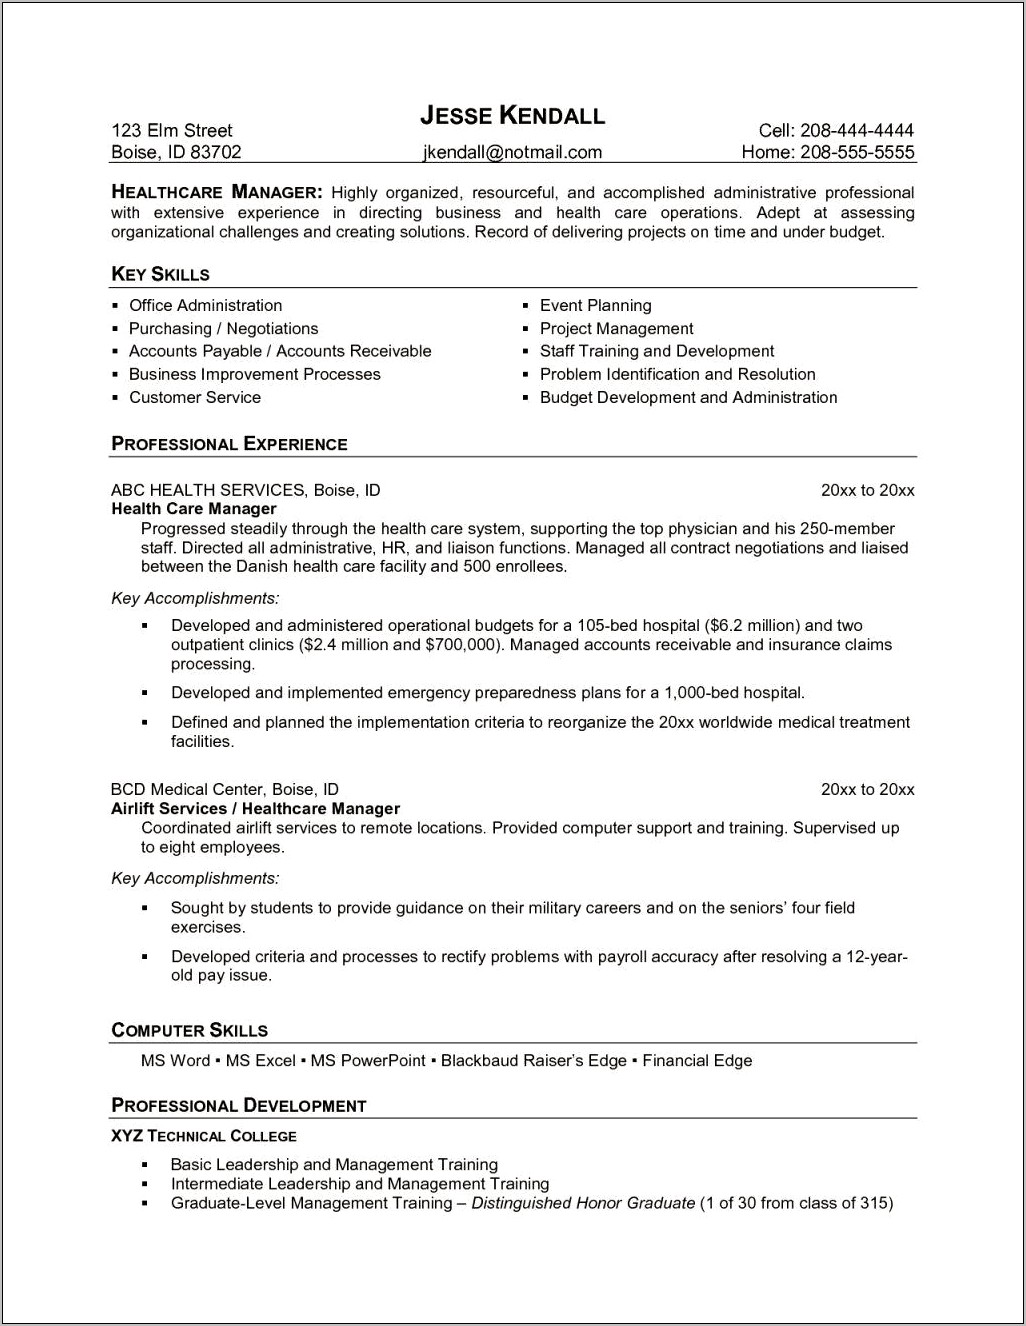 Resume Objective Examples Healthcare Manager